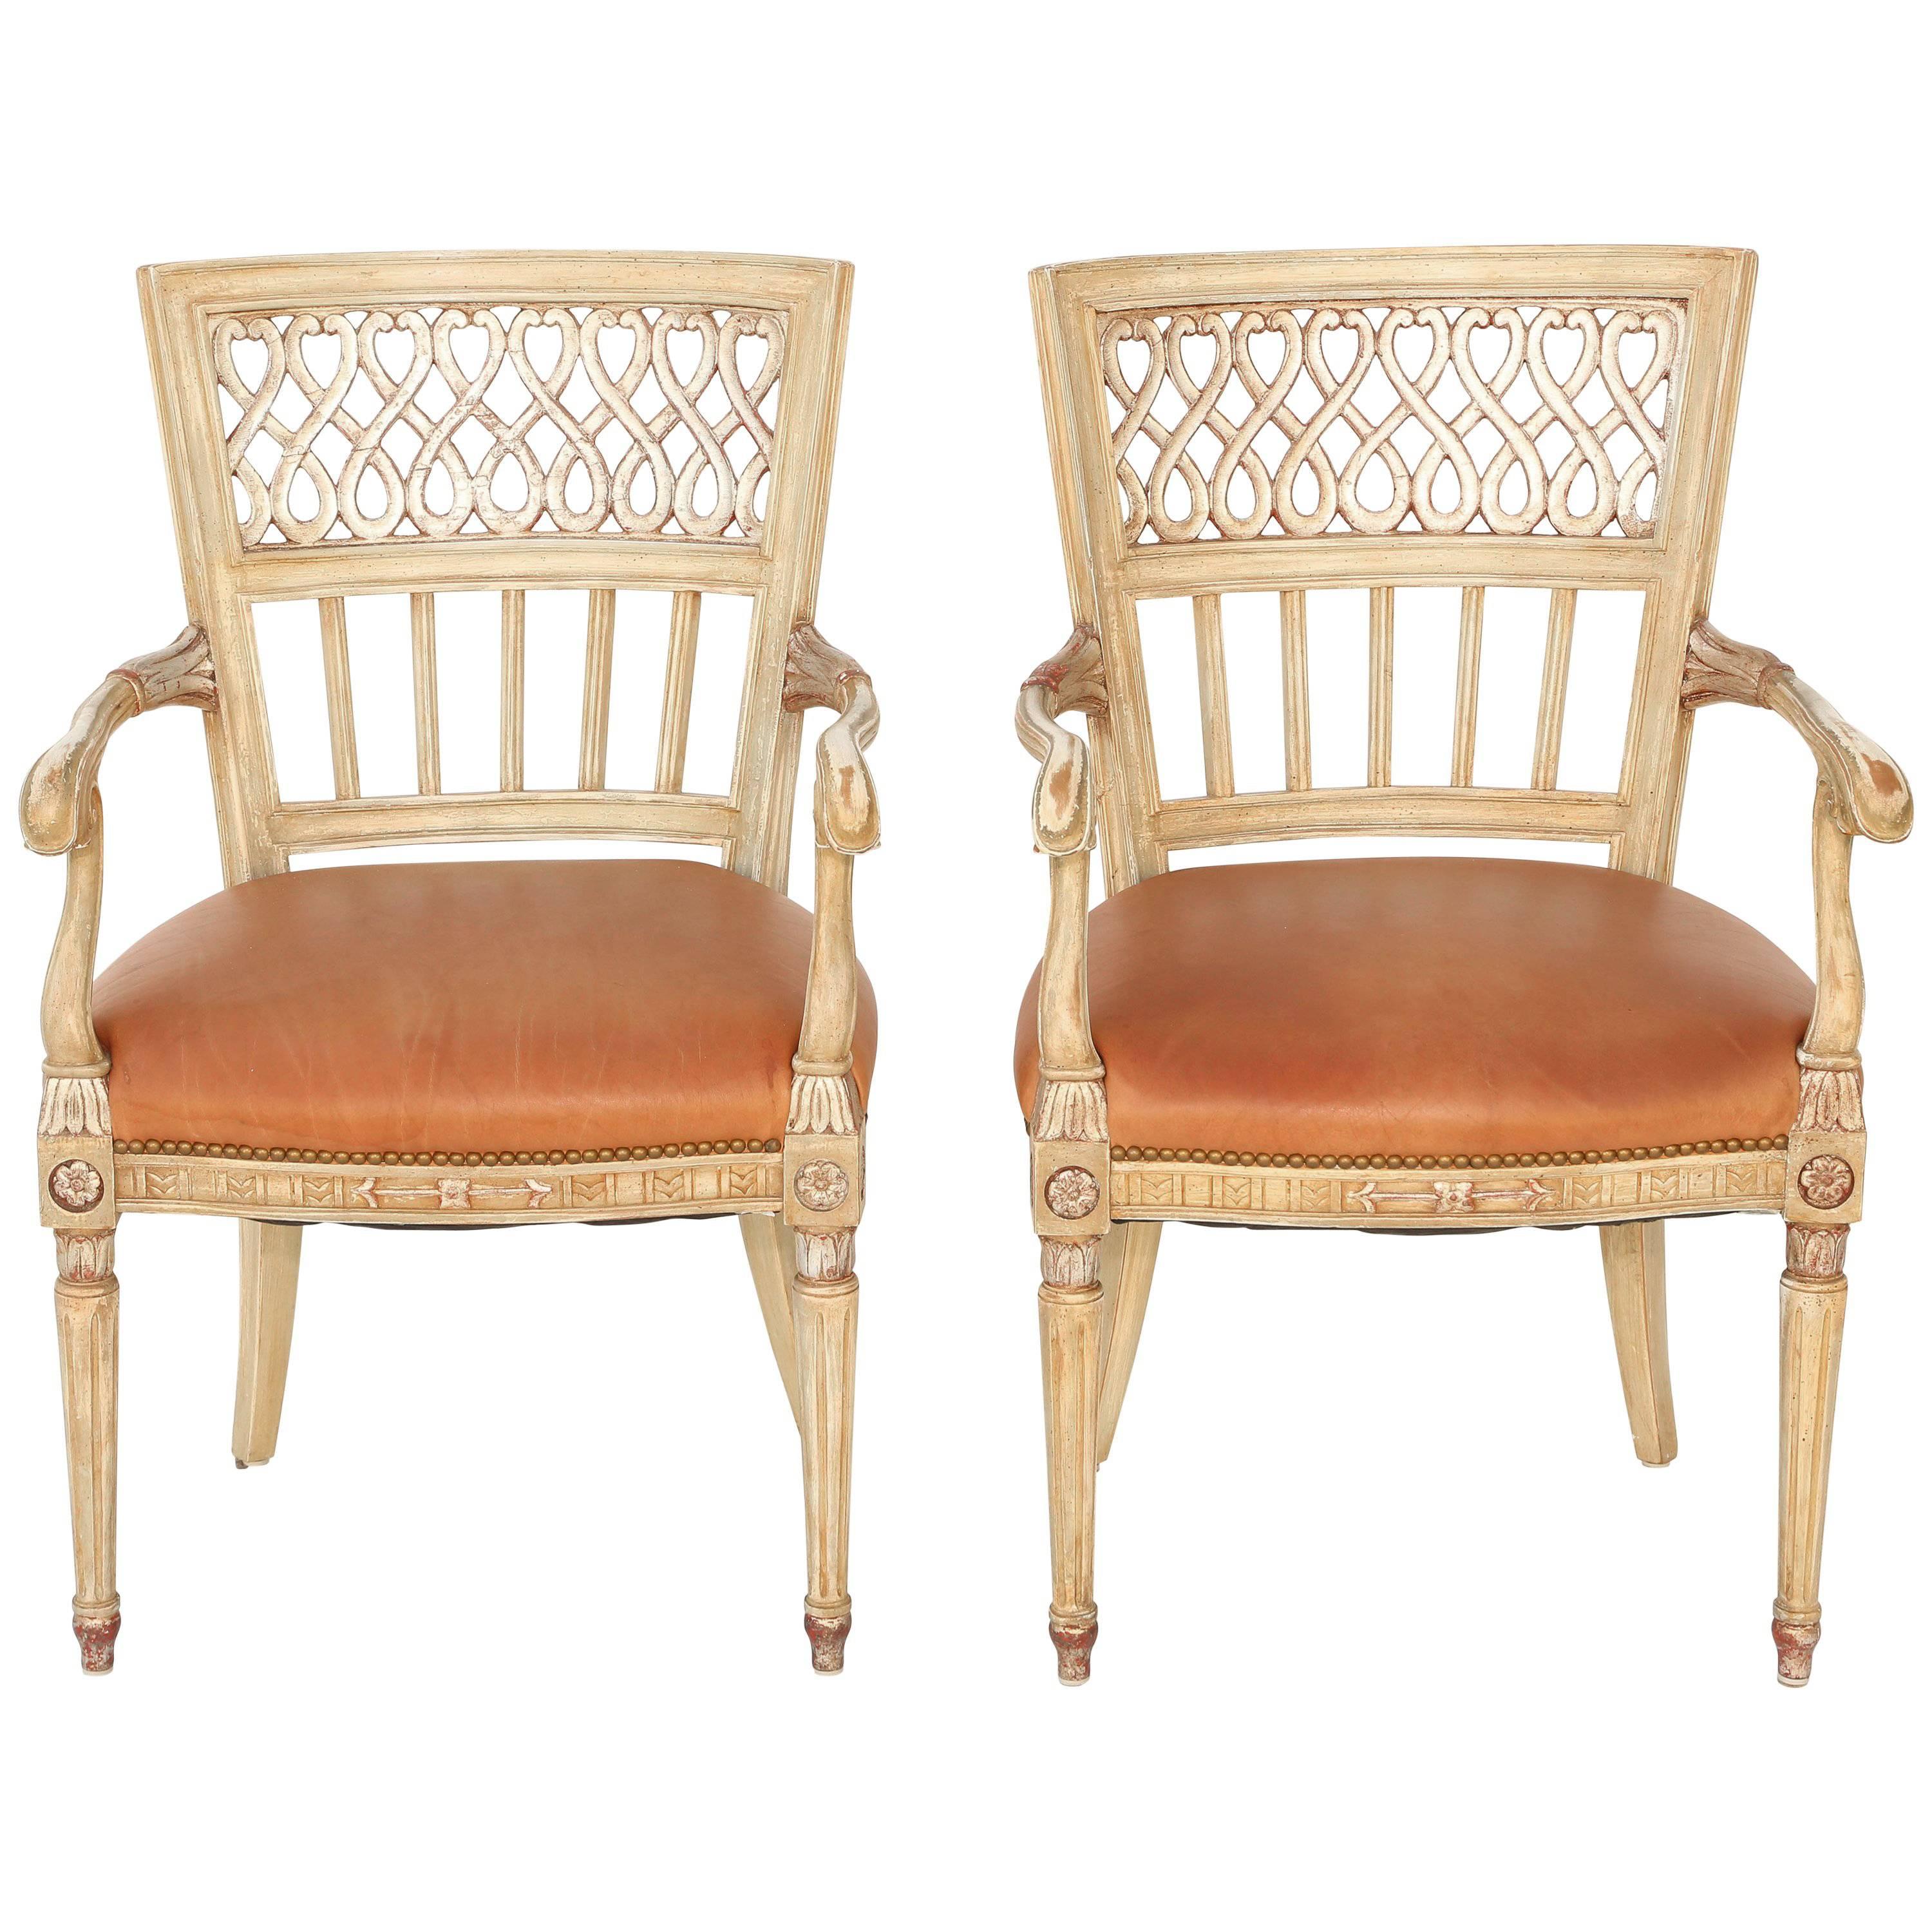 Pair of Painted and Parcel Silvergilt Italian Armchairs, circa 1920s For Sale